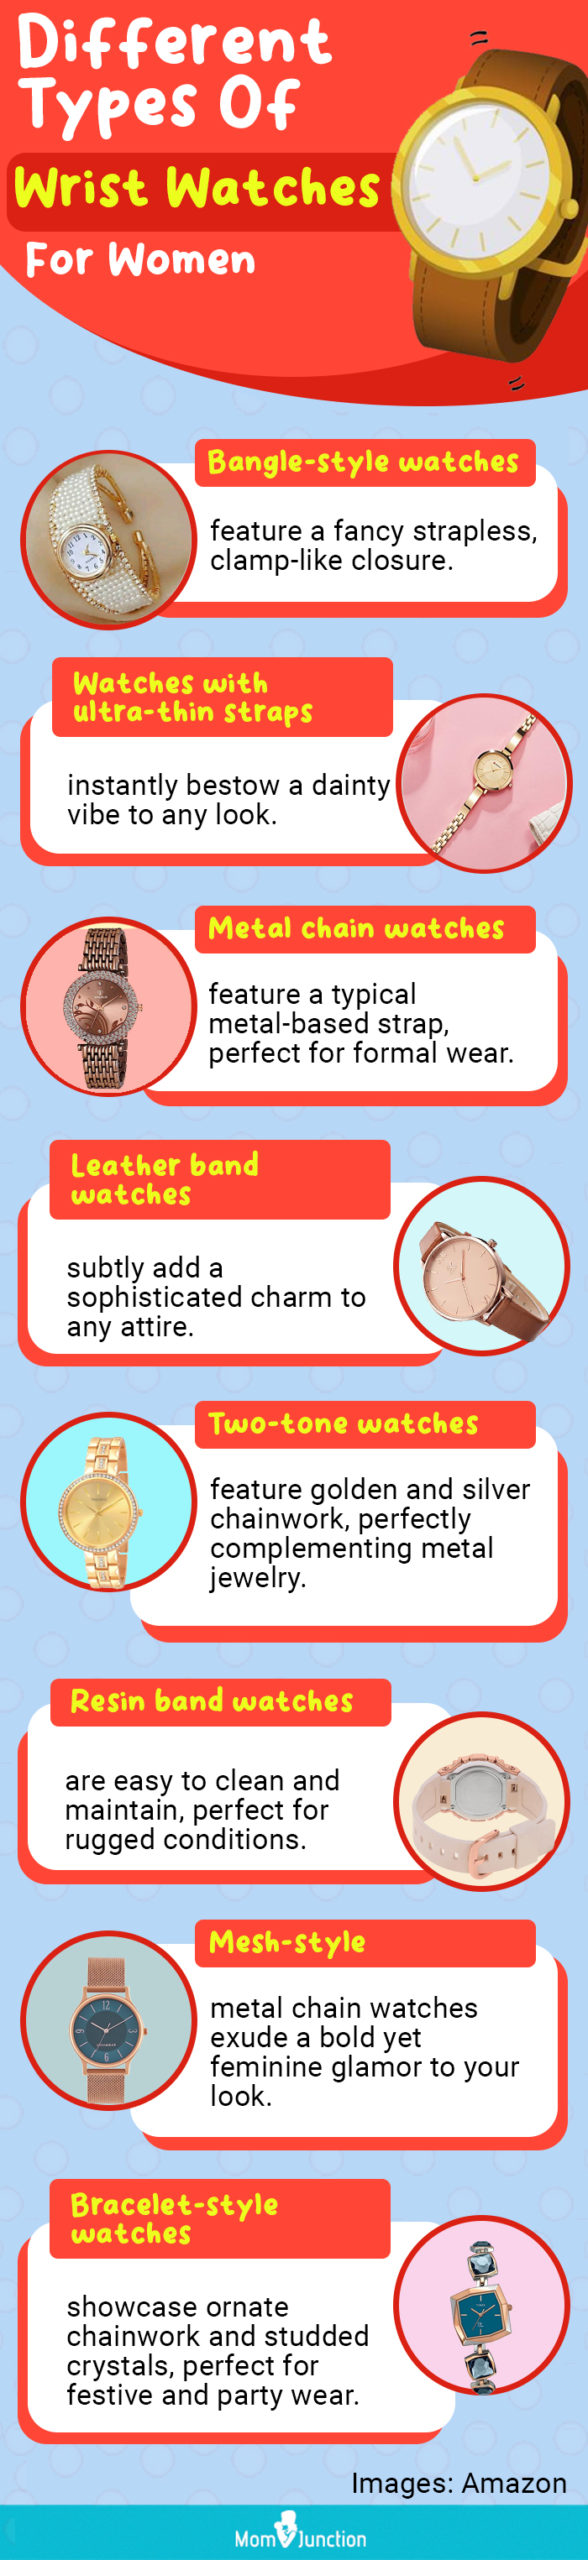 Different Types Of Wrist Watches For Women (infographic)